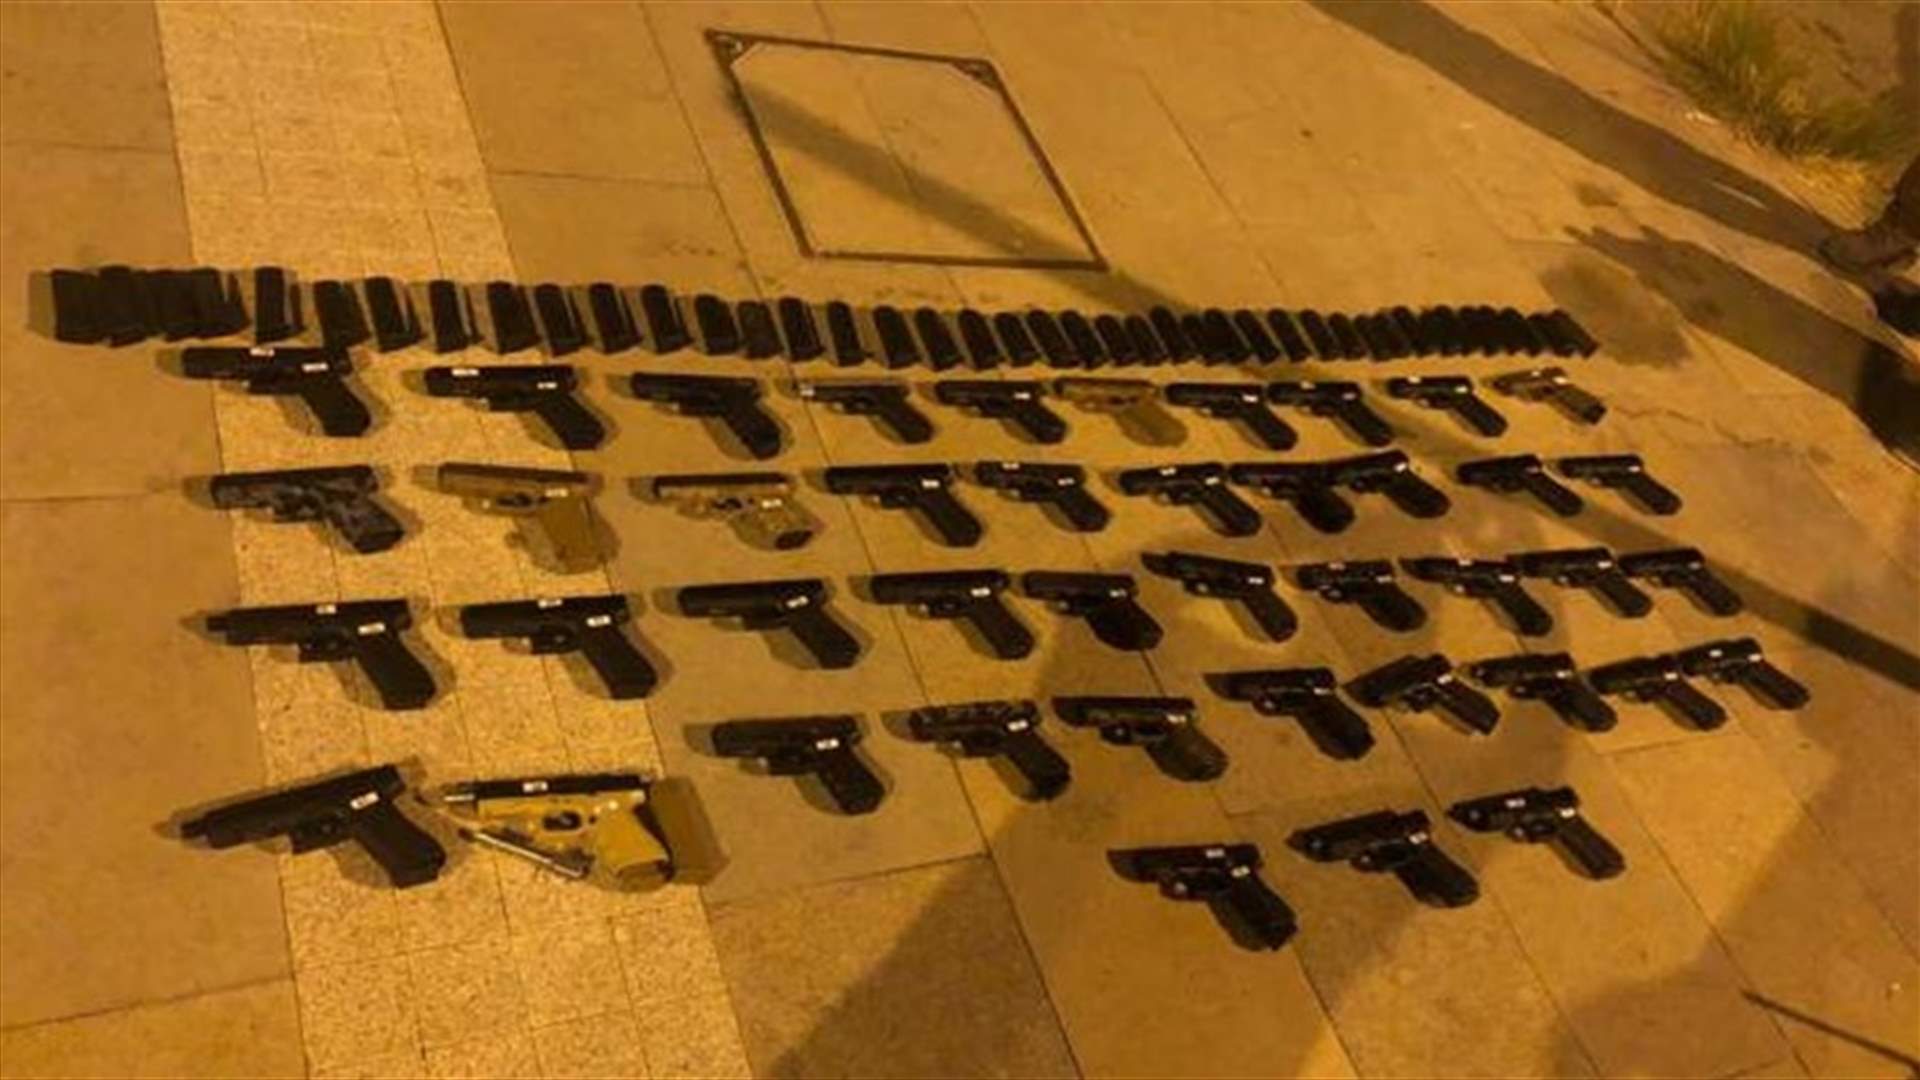 Israeli Army says attempt to smuggle weapons on borders with Lebanon thwarted